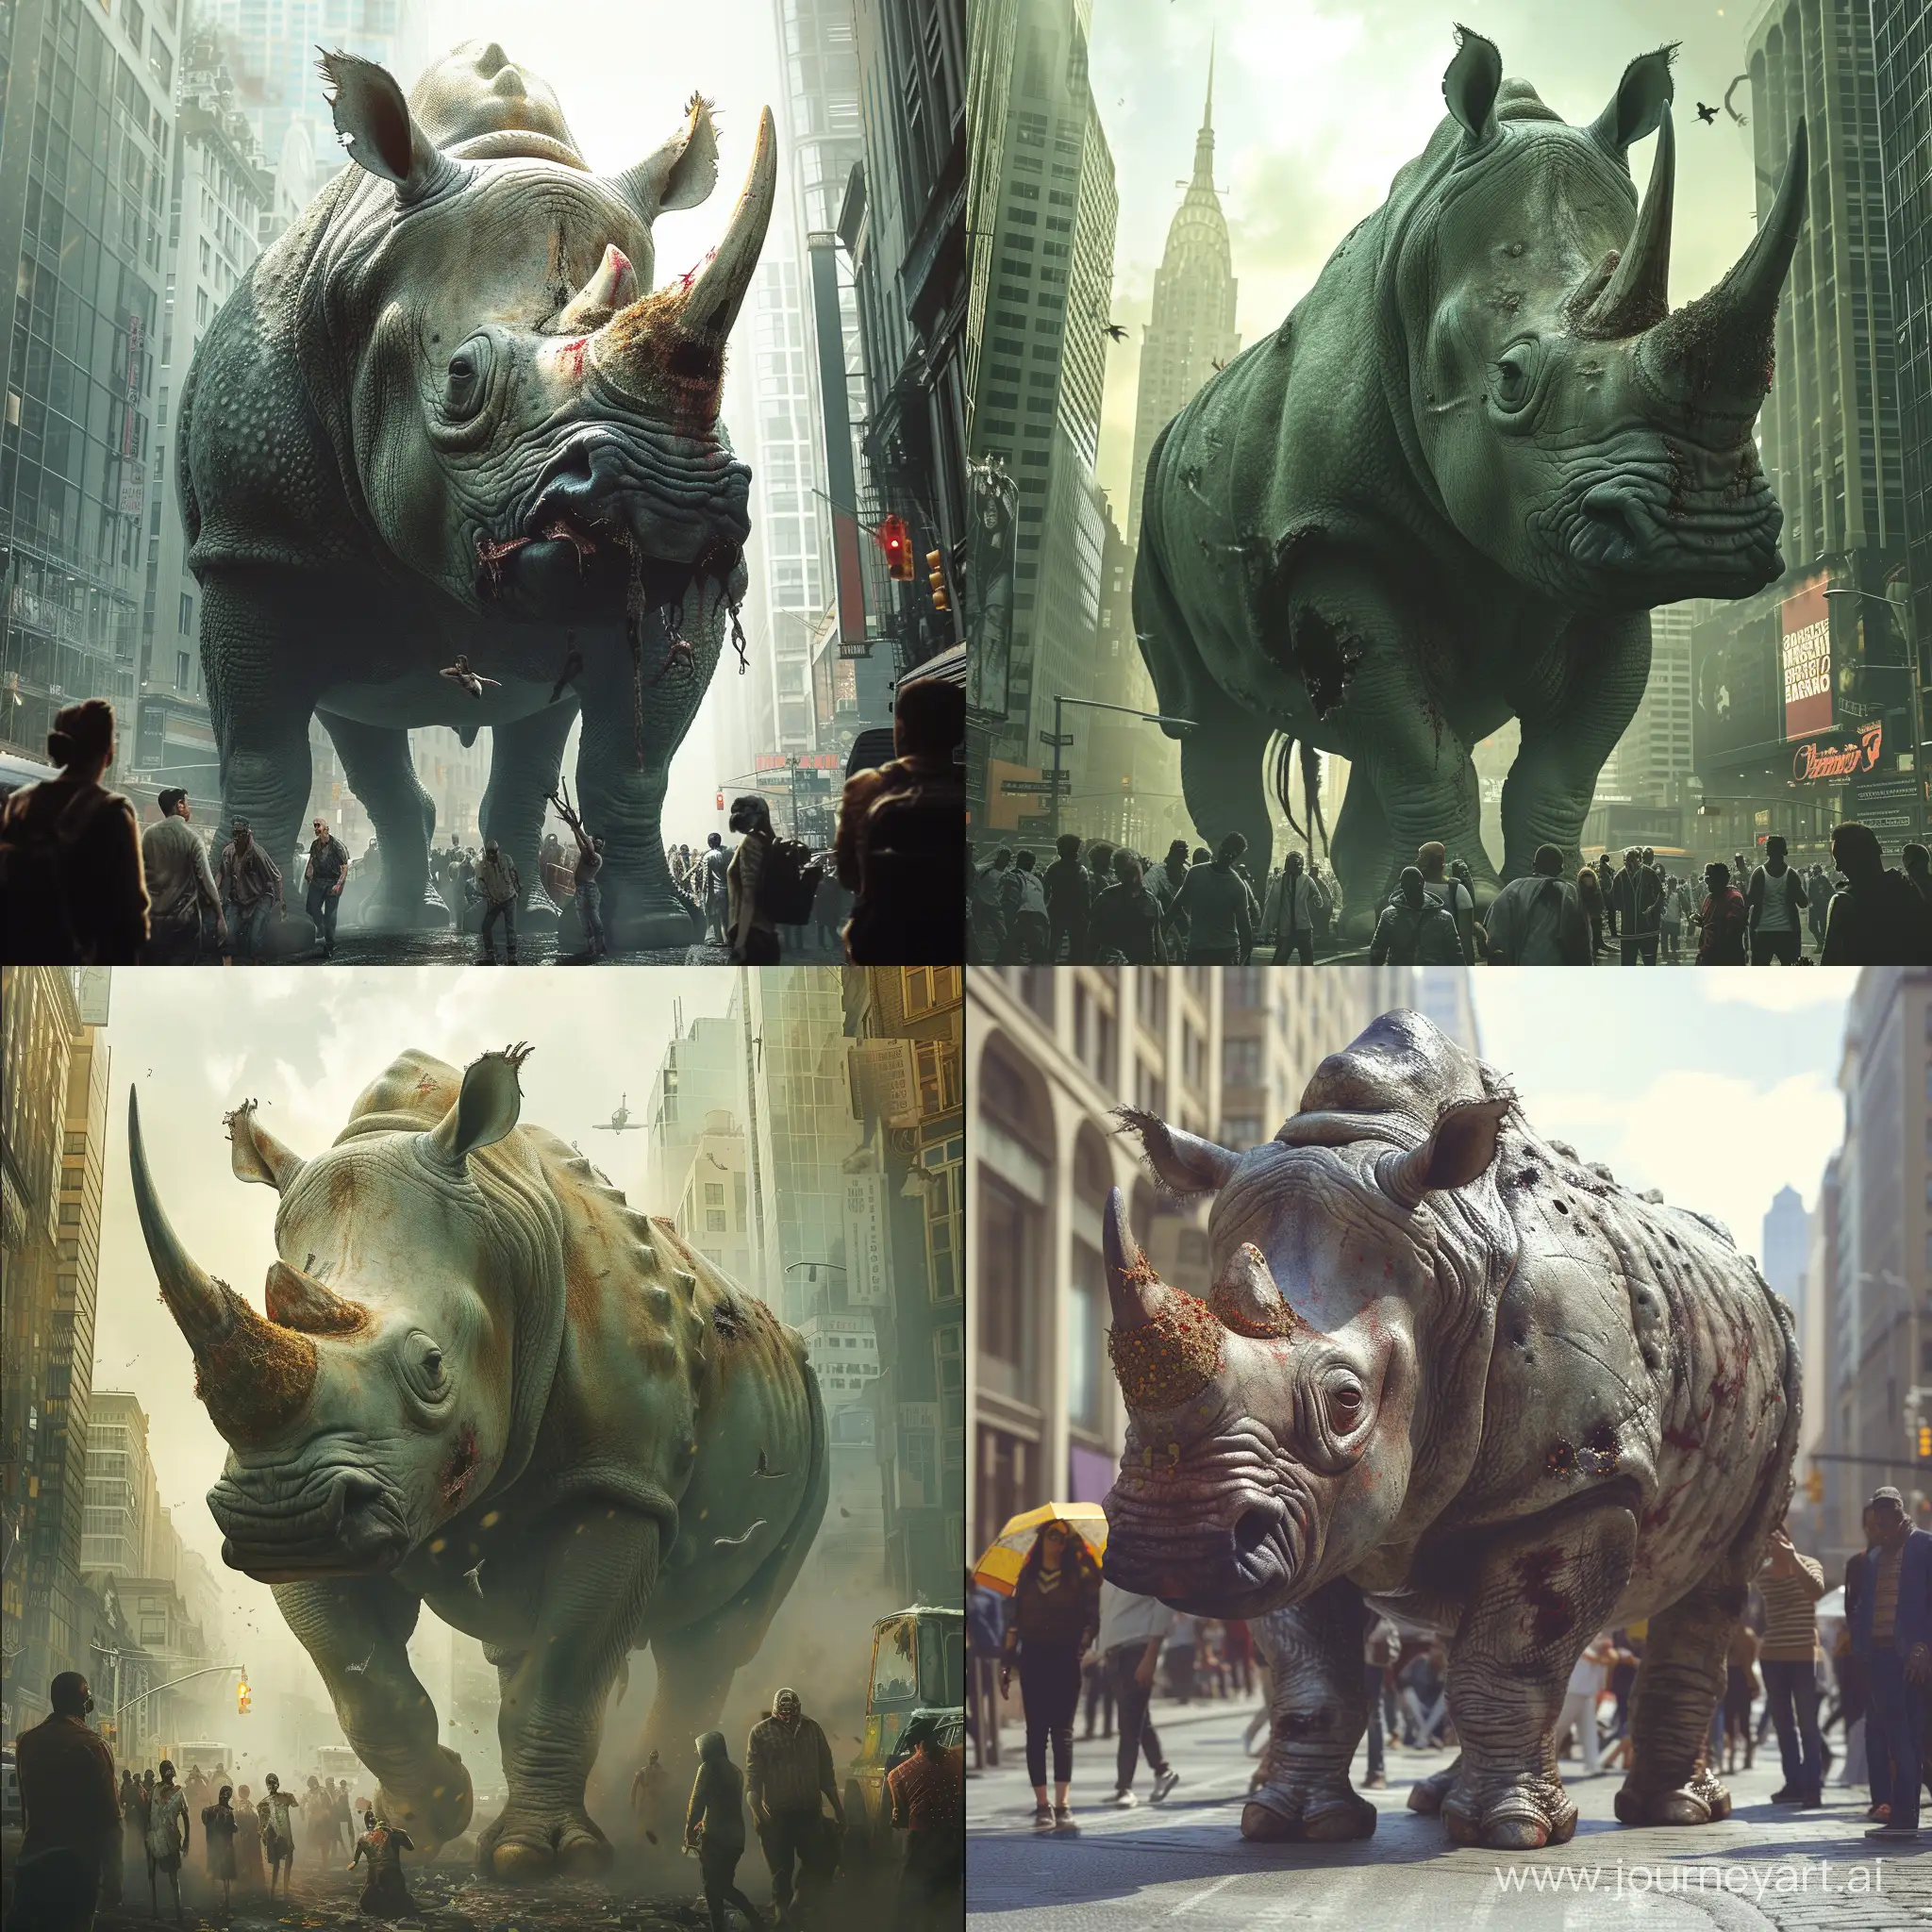 A zumbie rhinoceros with a big body and a ripe body  looking people in the city 